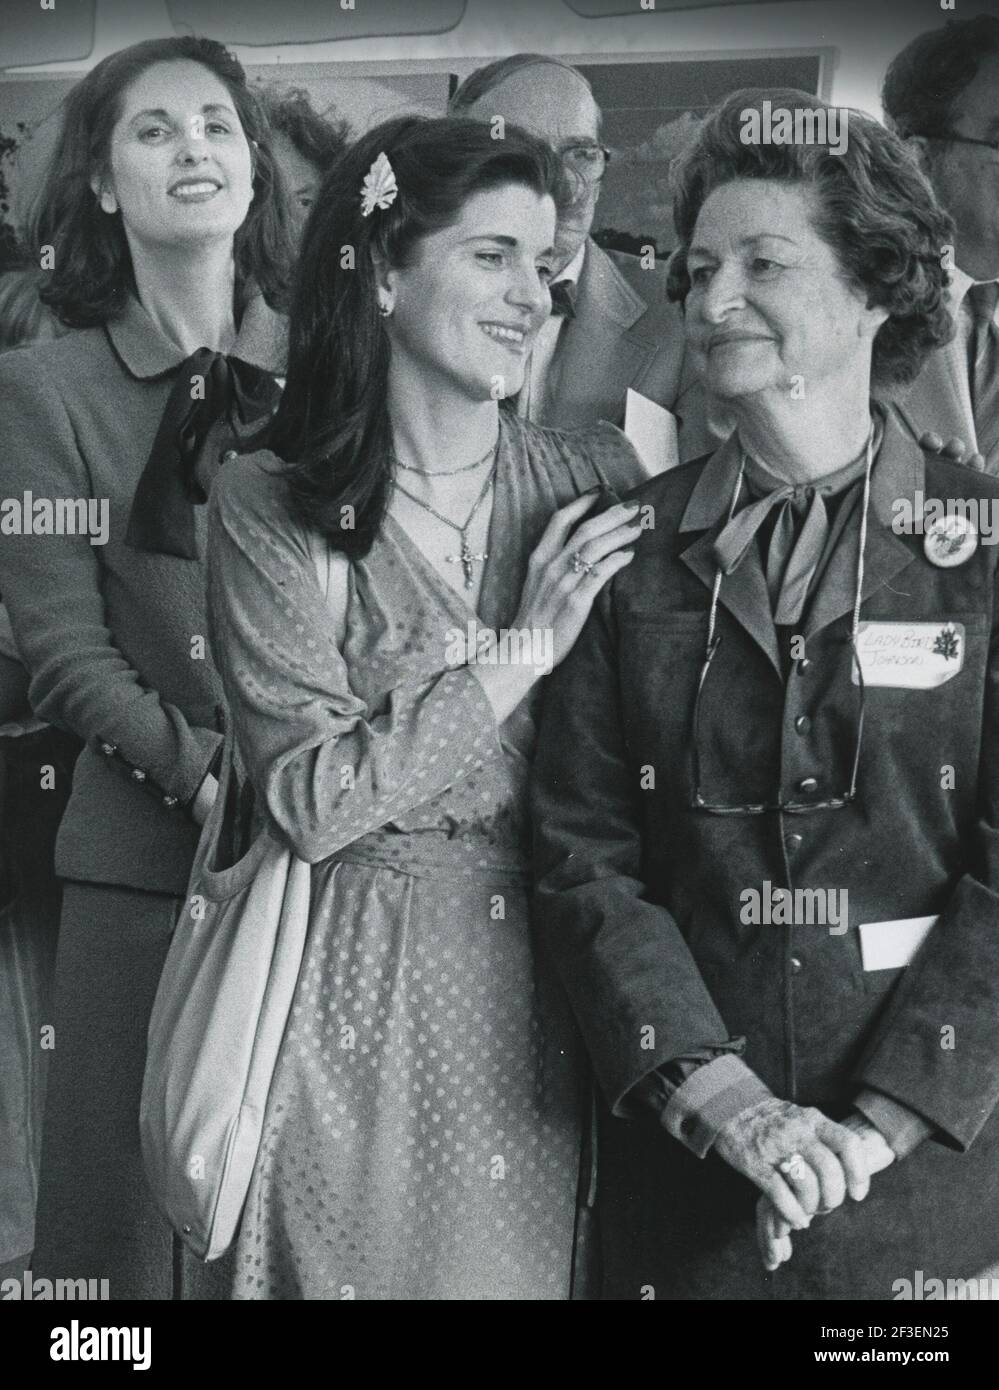 Retrospective on the life of former First Lady, Lady Bird Johnson during her years in Texas after the death of former President Lyndon Baines Johnson on January 22, 1973.  This photo shows Lady Bird Johnson (right) with her daughters Lynda Robb (left) and Luci Johnson (center) at the LBJ Library in the late 1980's.  ©Bob Daemmrich Stock Photo